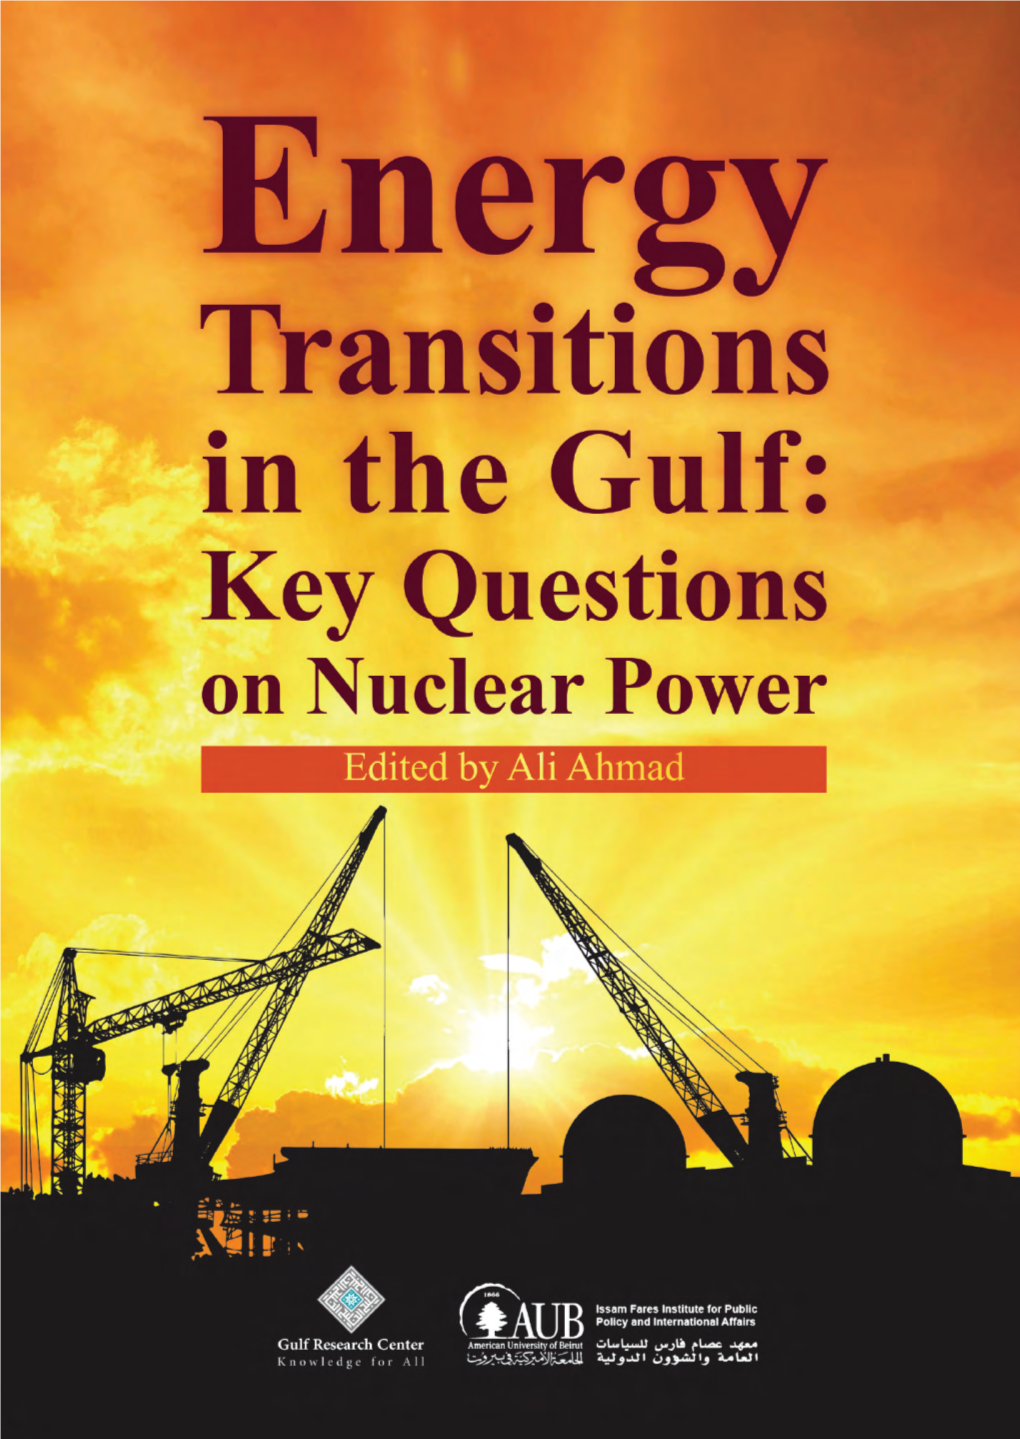 Key Questions on Nuclear Power